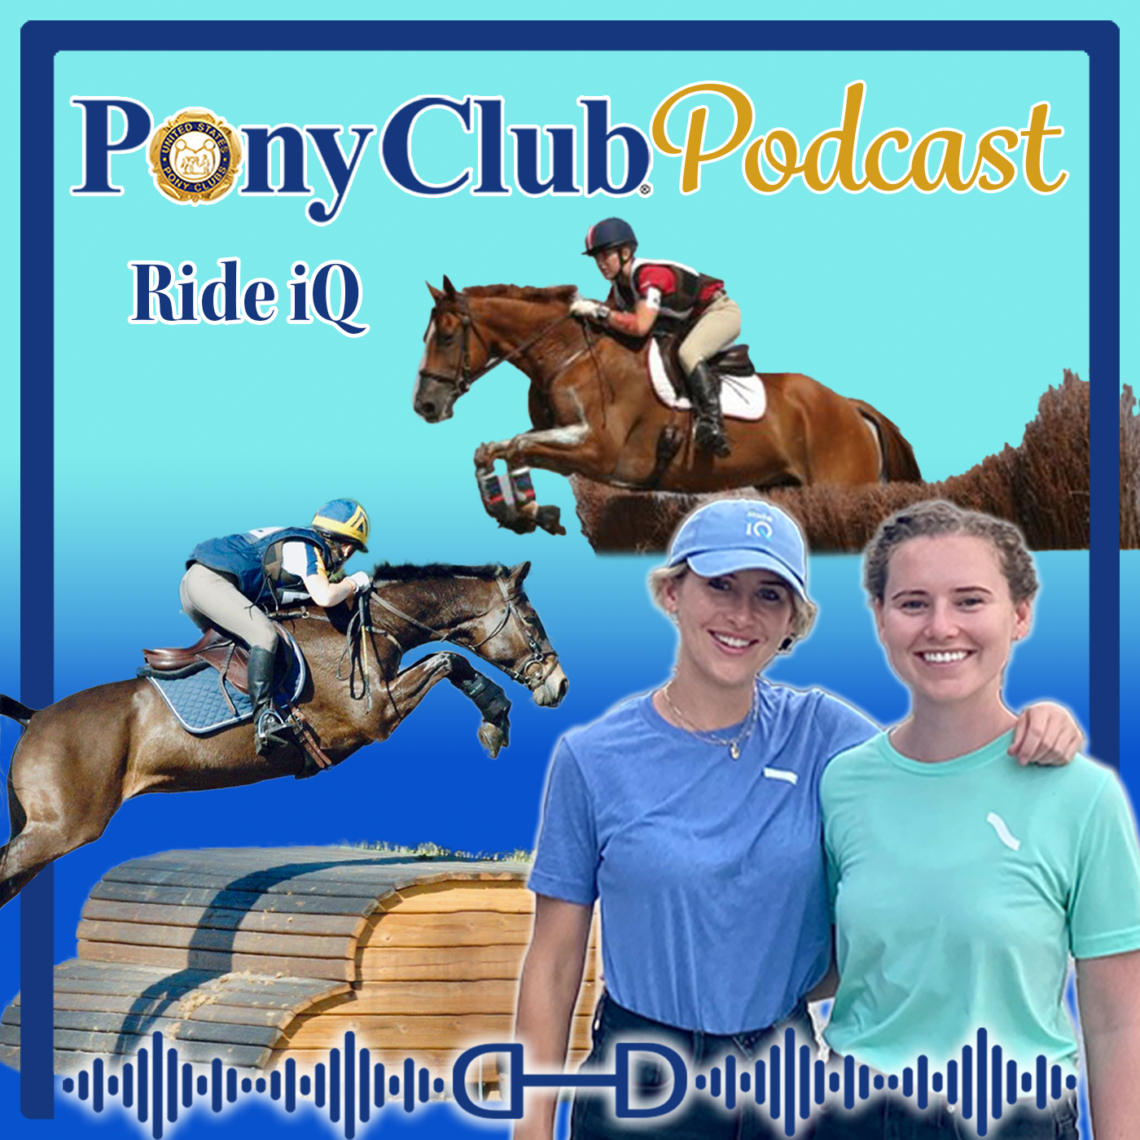 A promotional design for the Pony Club Podcast episode #8